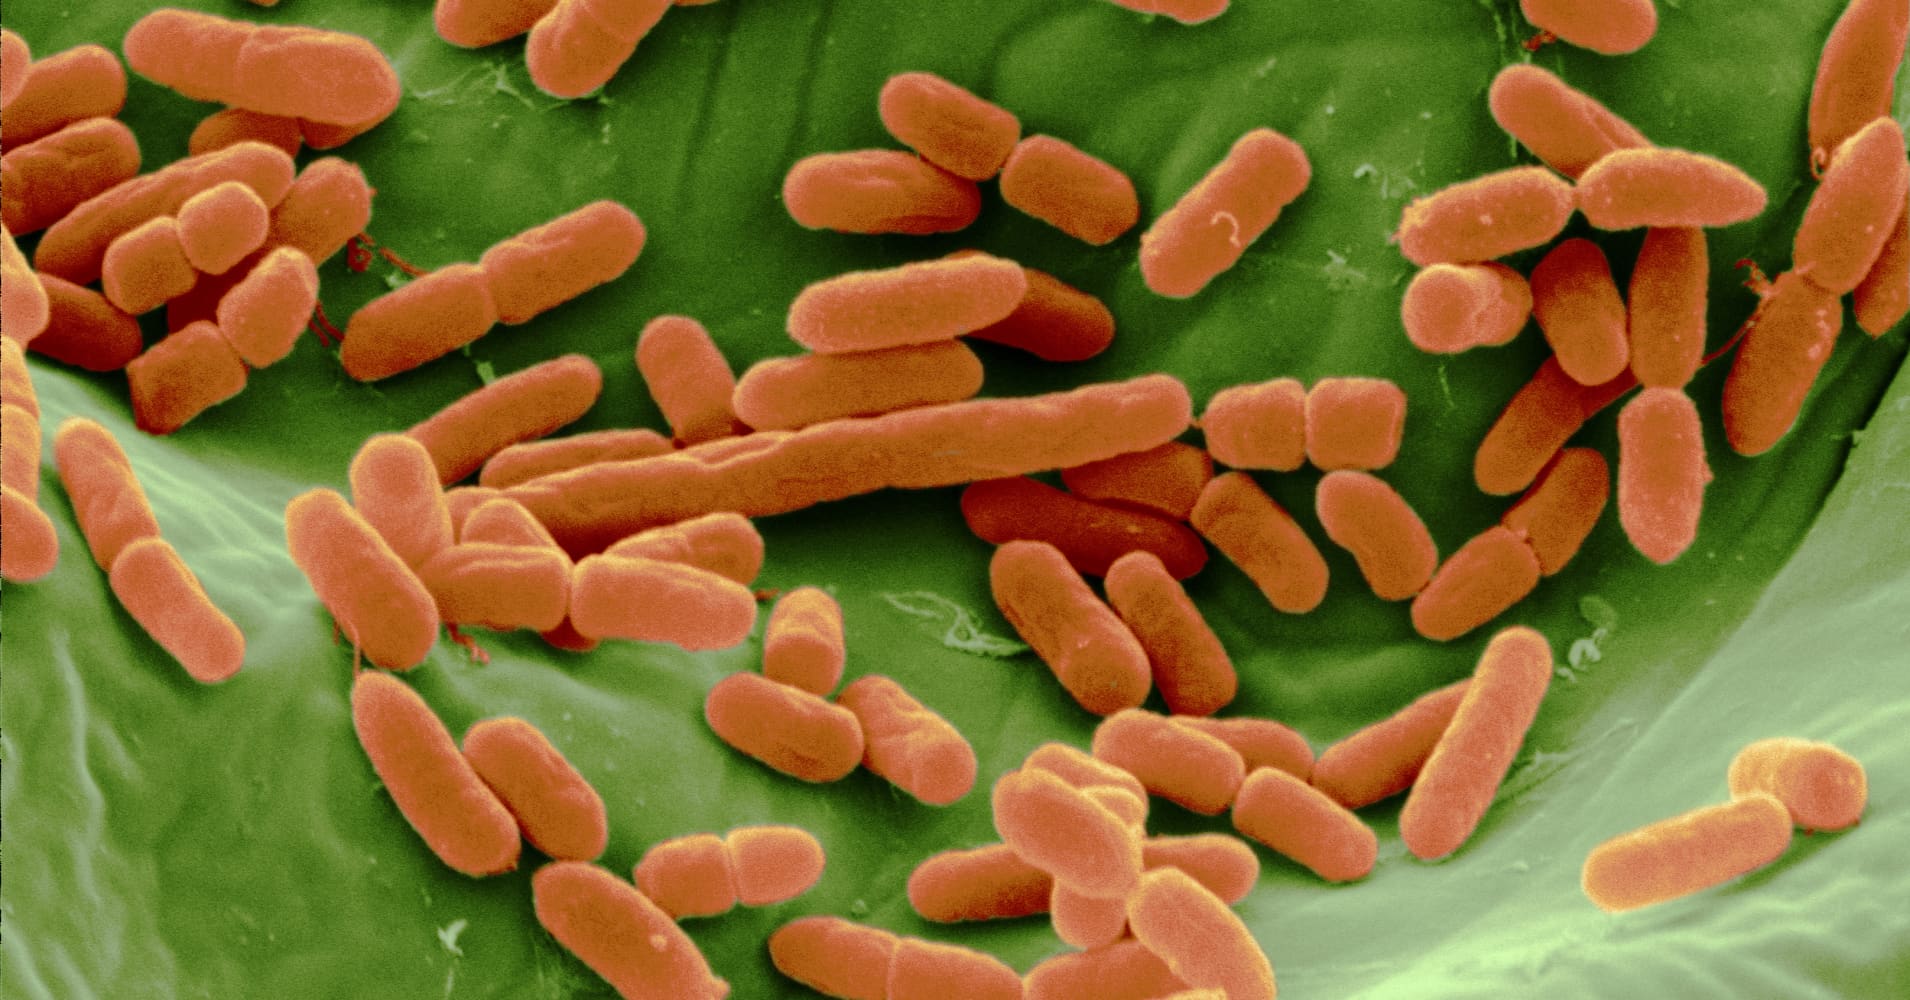 E. coli outbreak sickens 96 people across 5 states, CDC says